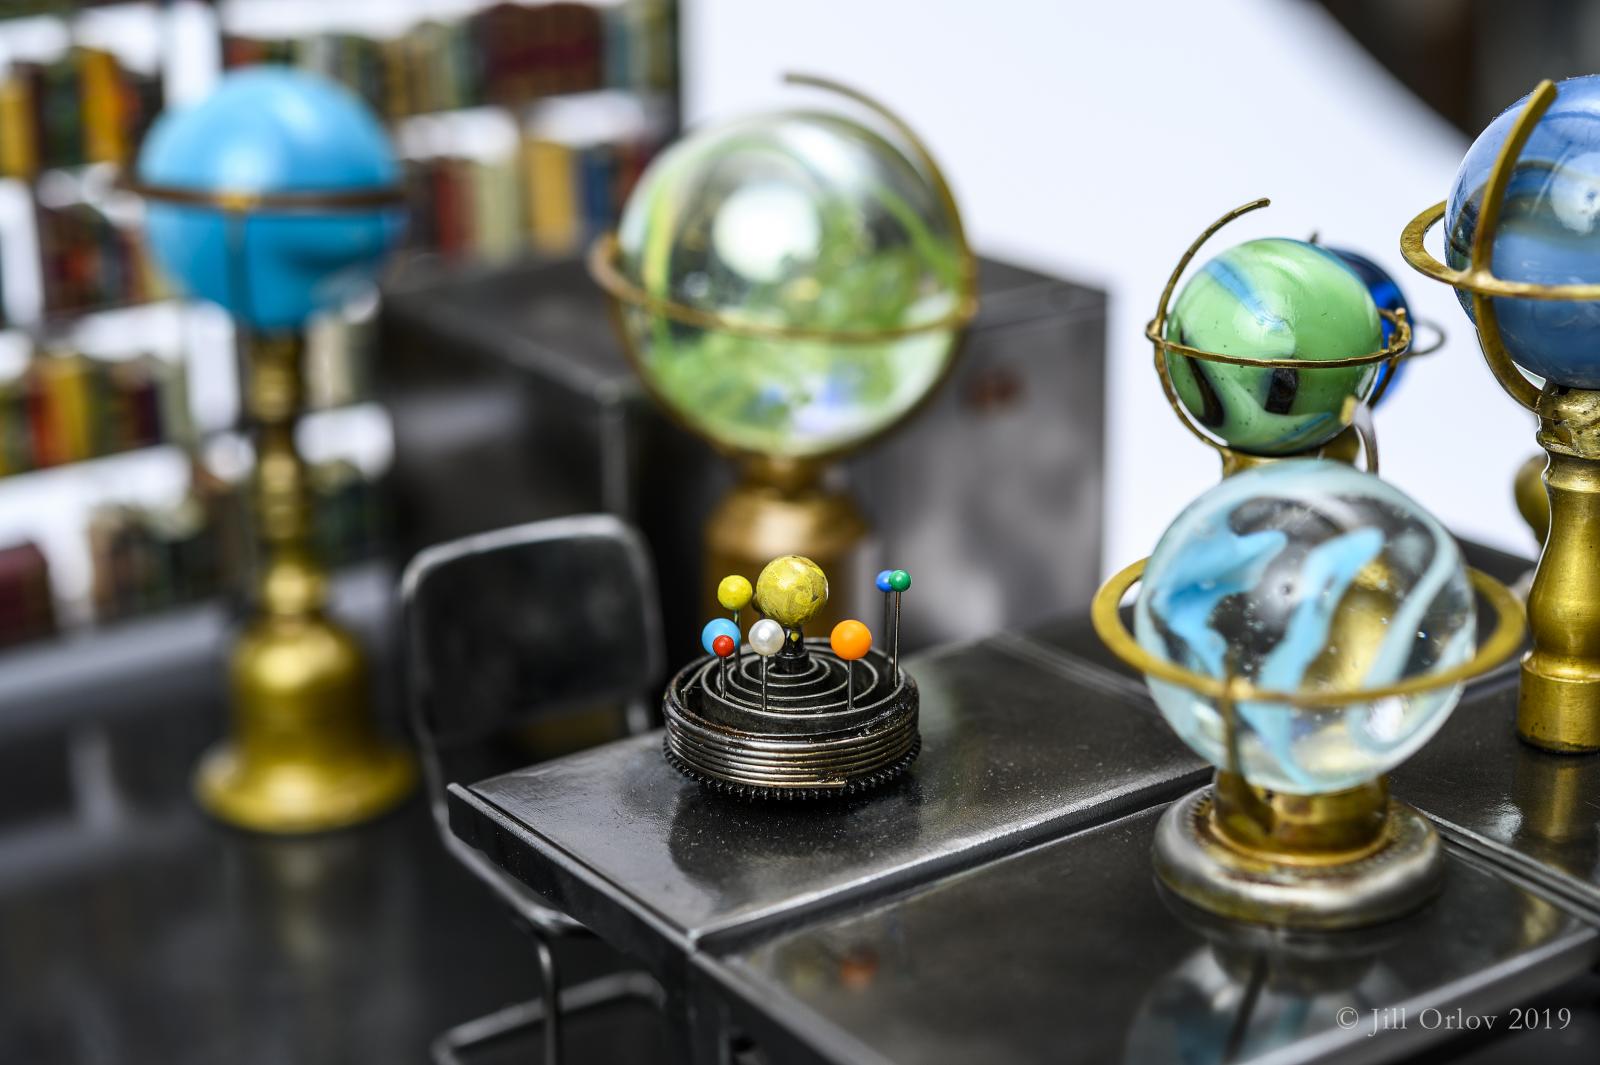 A detail of a larger sculpture showing the miniature orrery model of the solar system and several globes made of marbles within a scene of the movie Wings of Desire